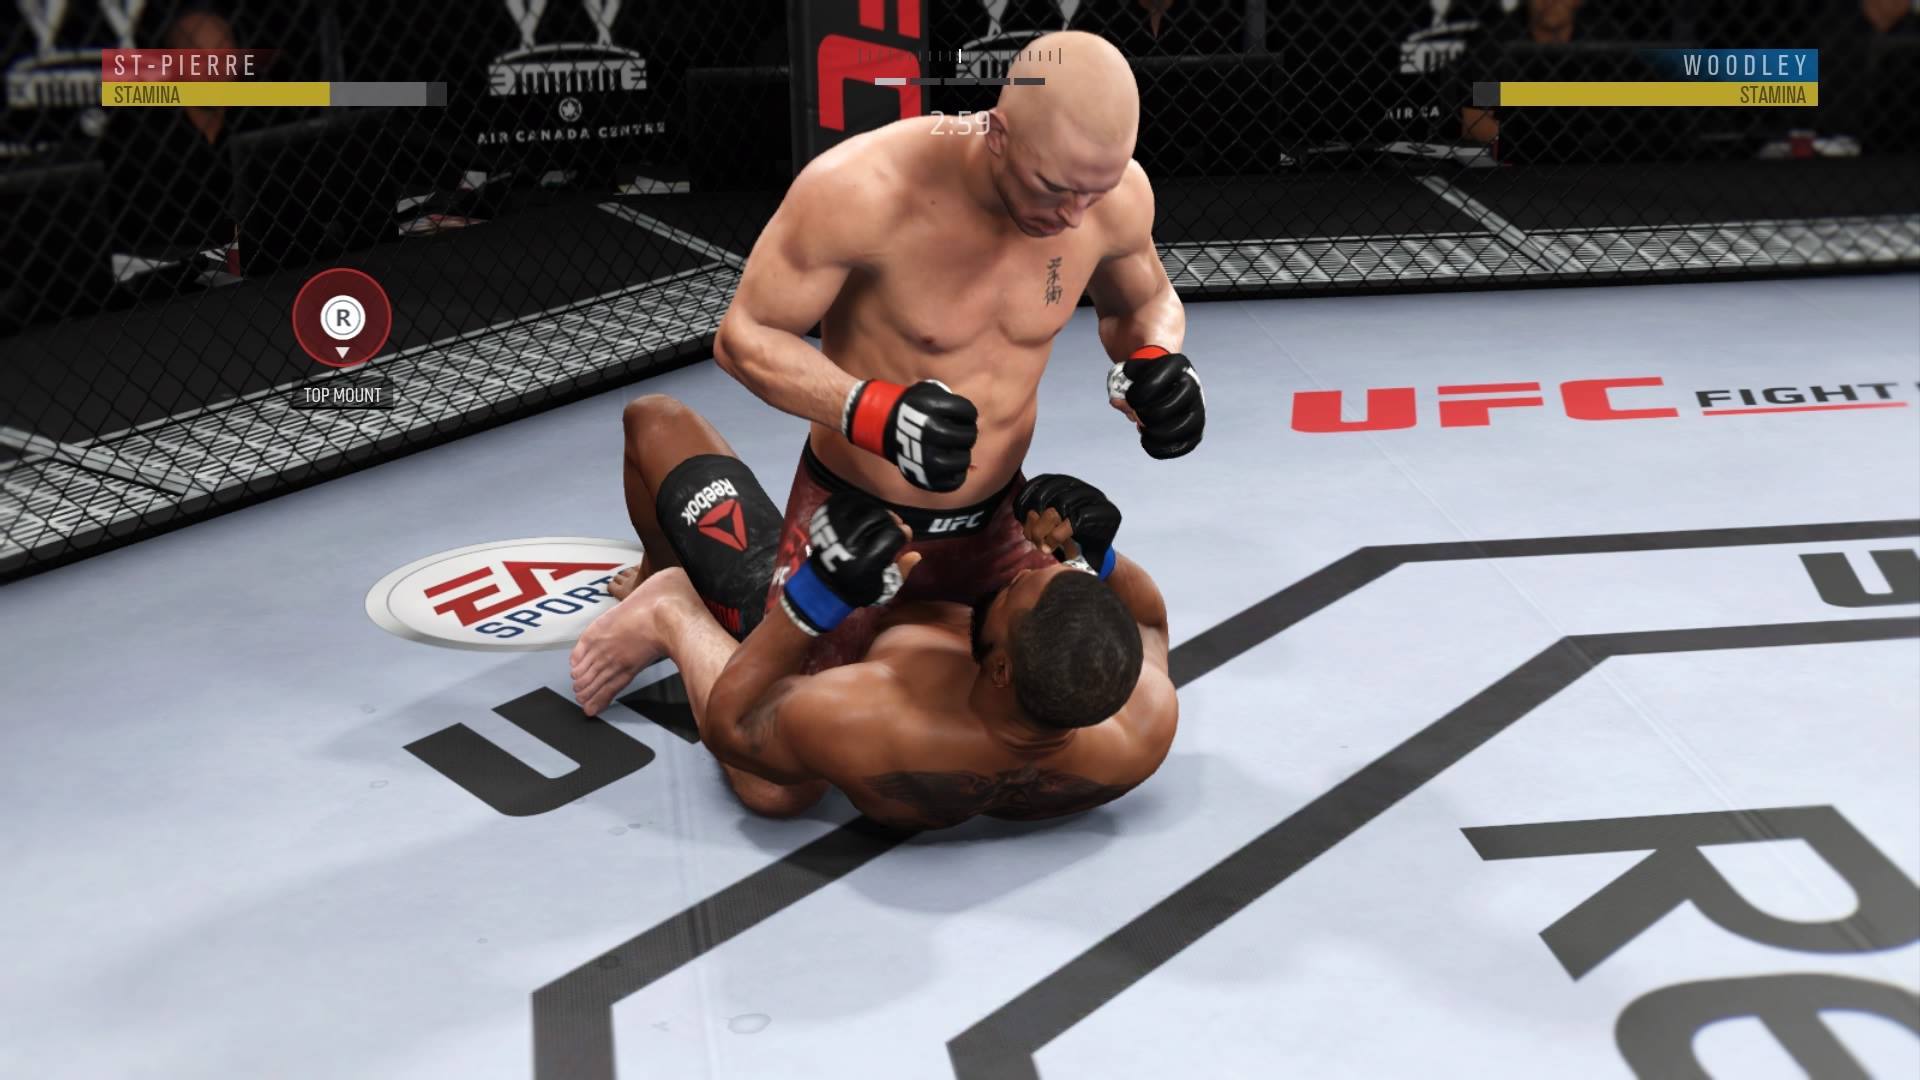 UFC Review: A Tense, Exciting, Recreation Of MMA - GameSpot